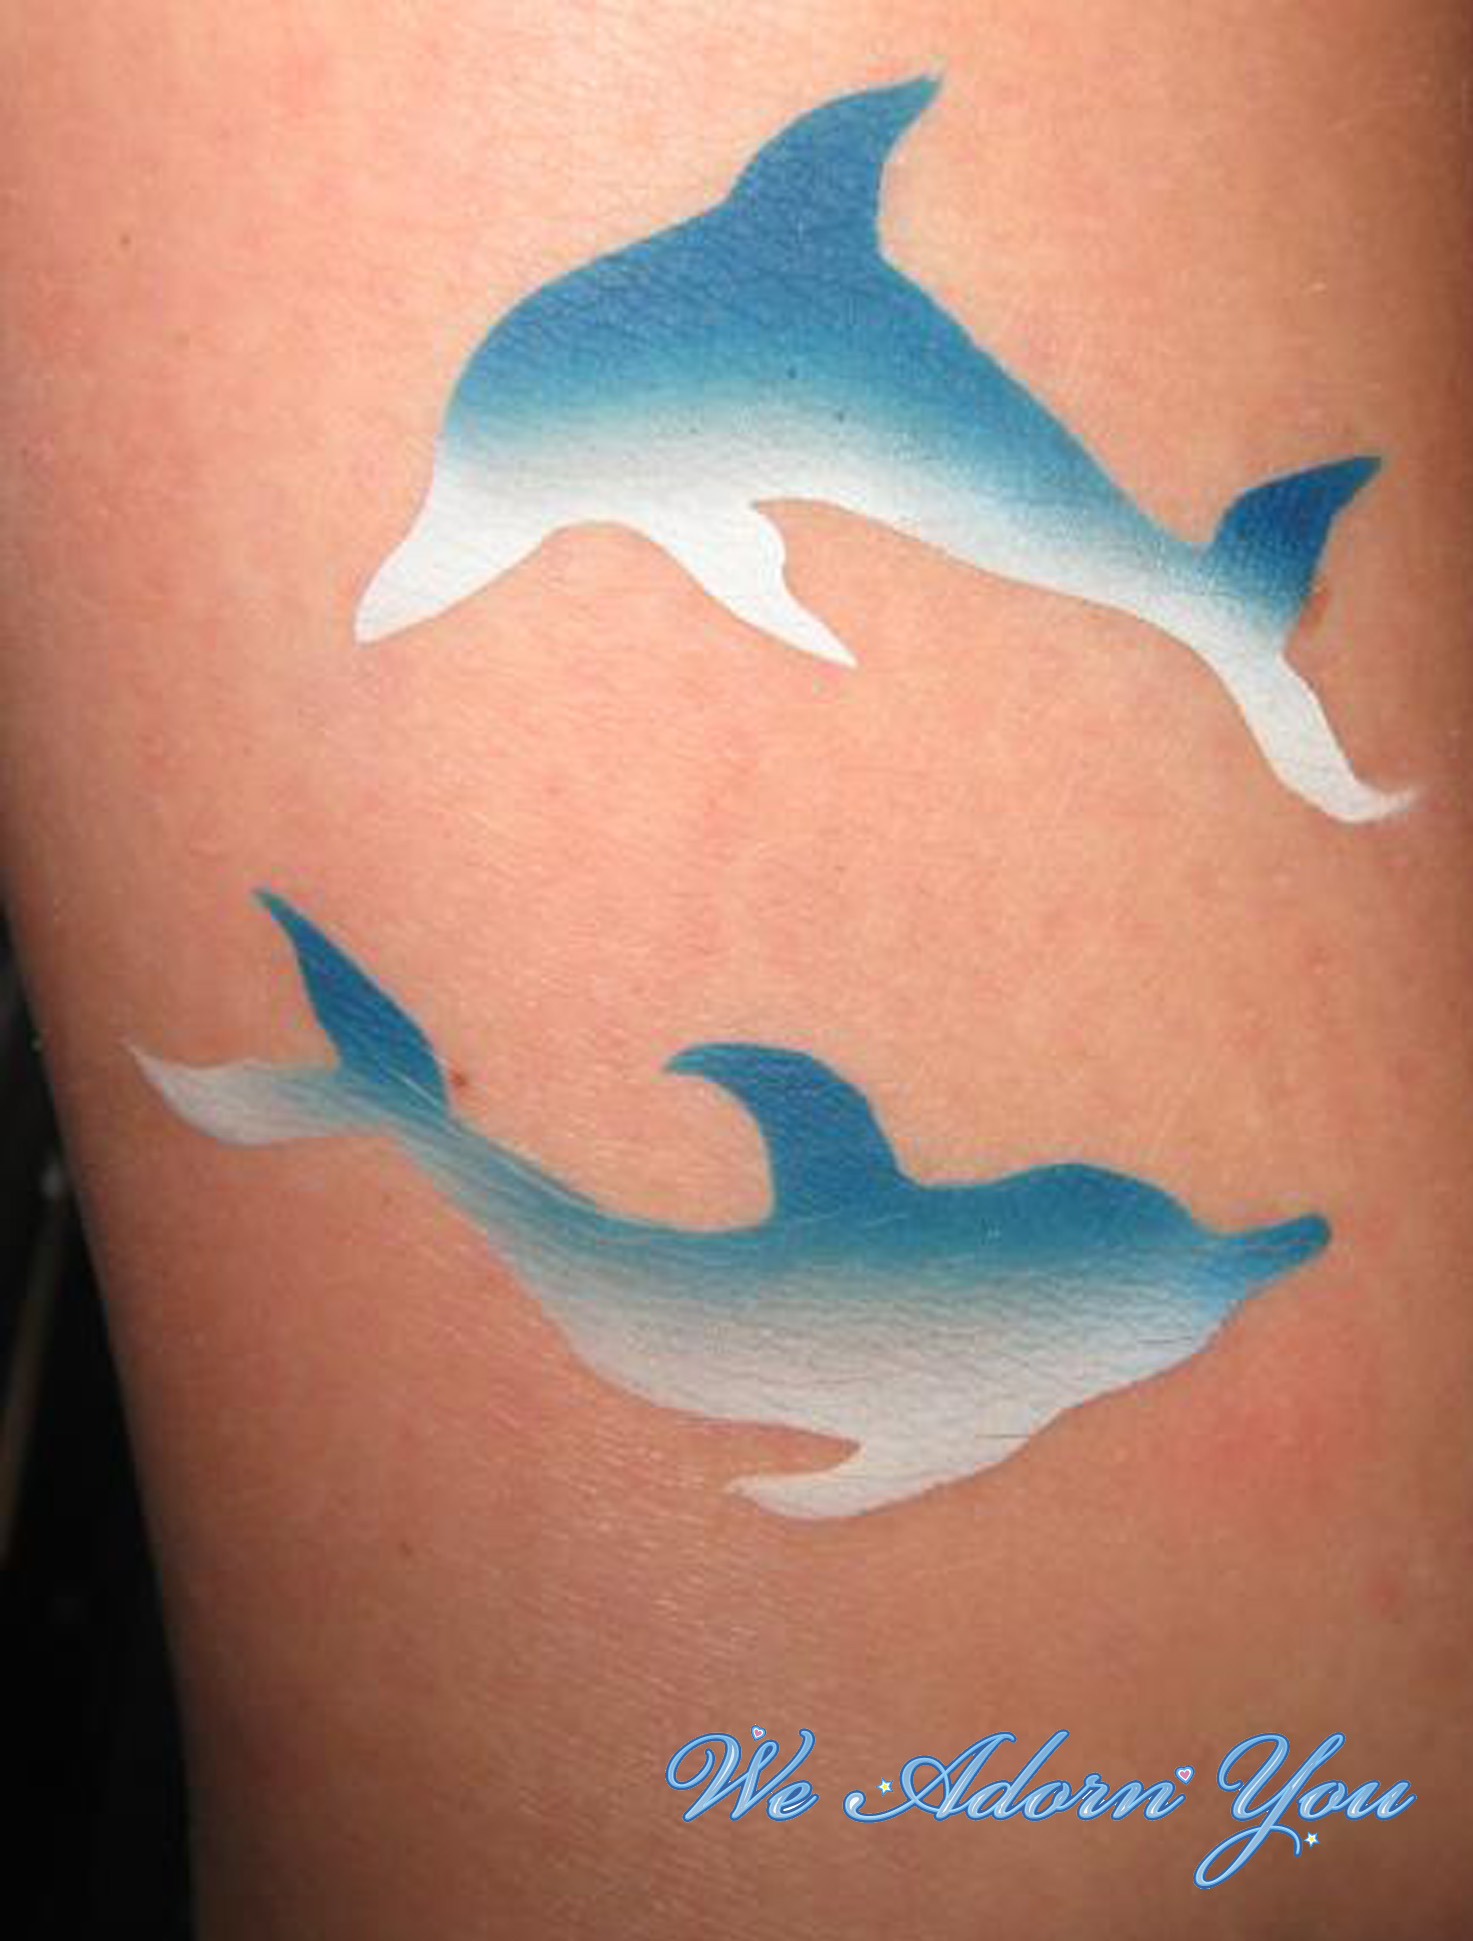 Airbrush Tattoos Dolphins - We Adorn You.jpg